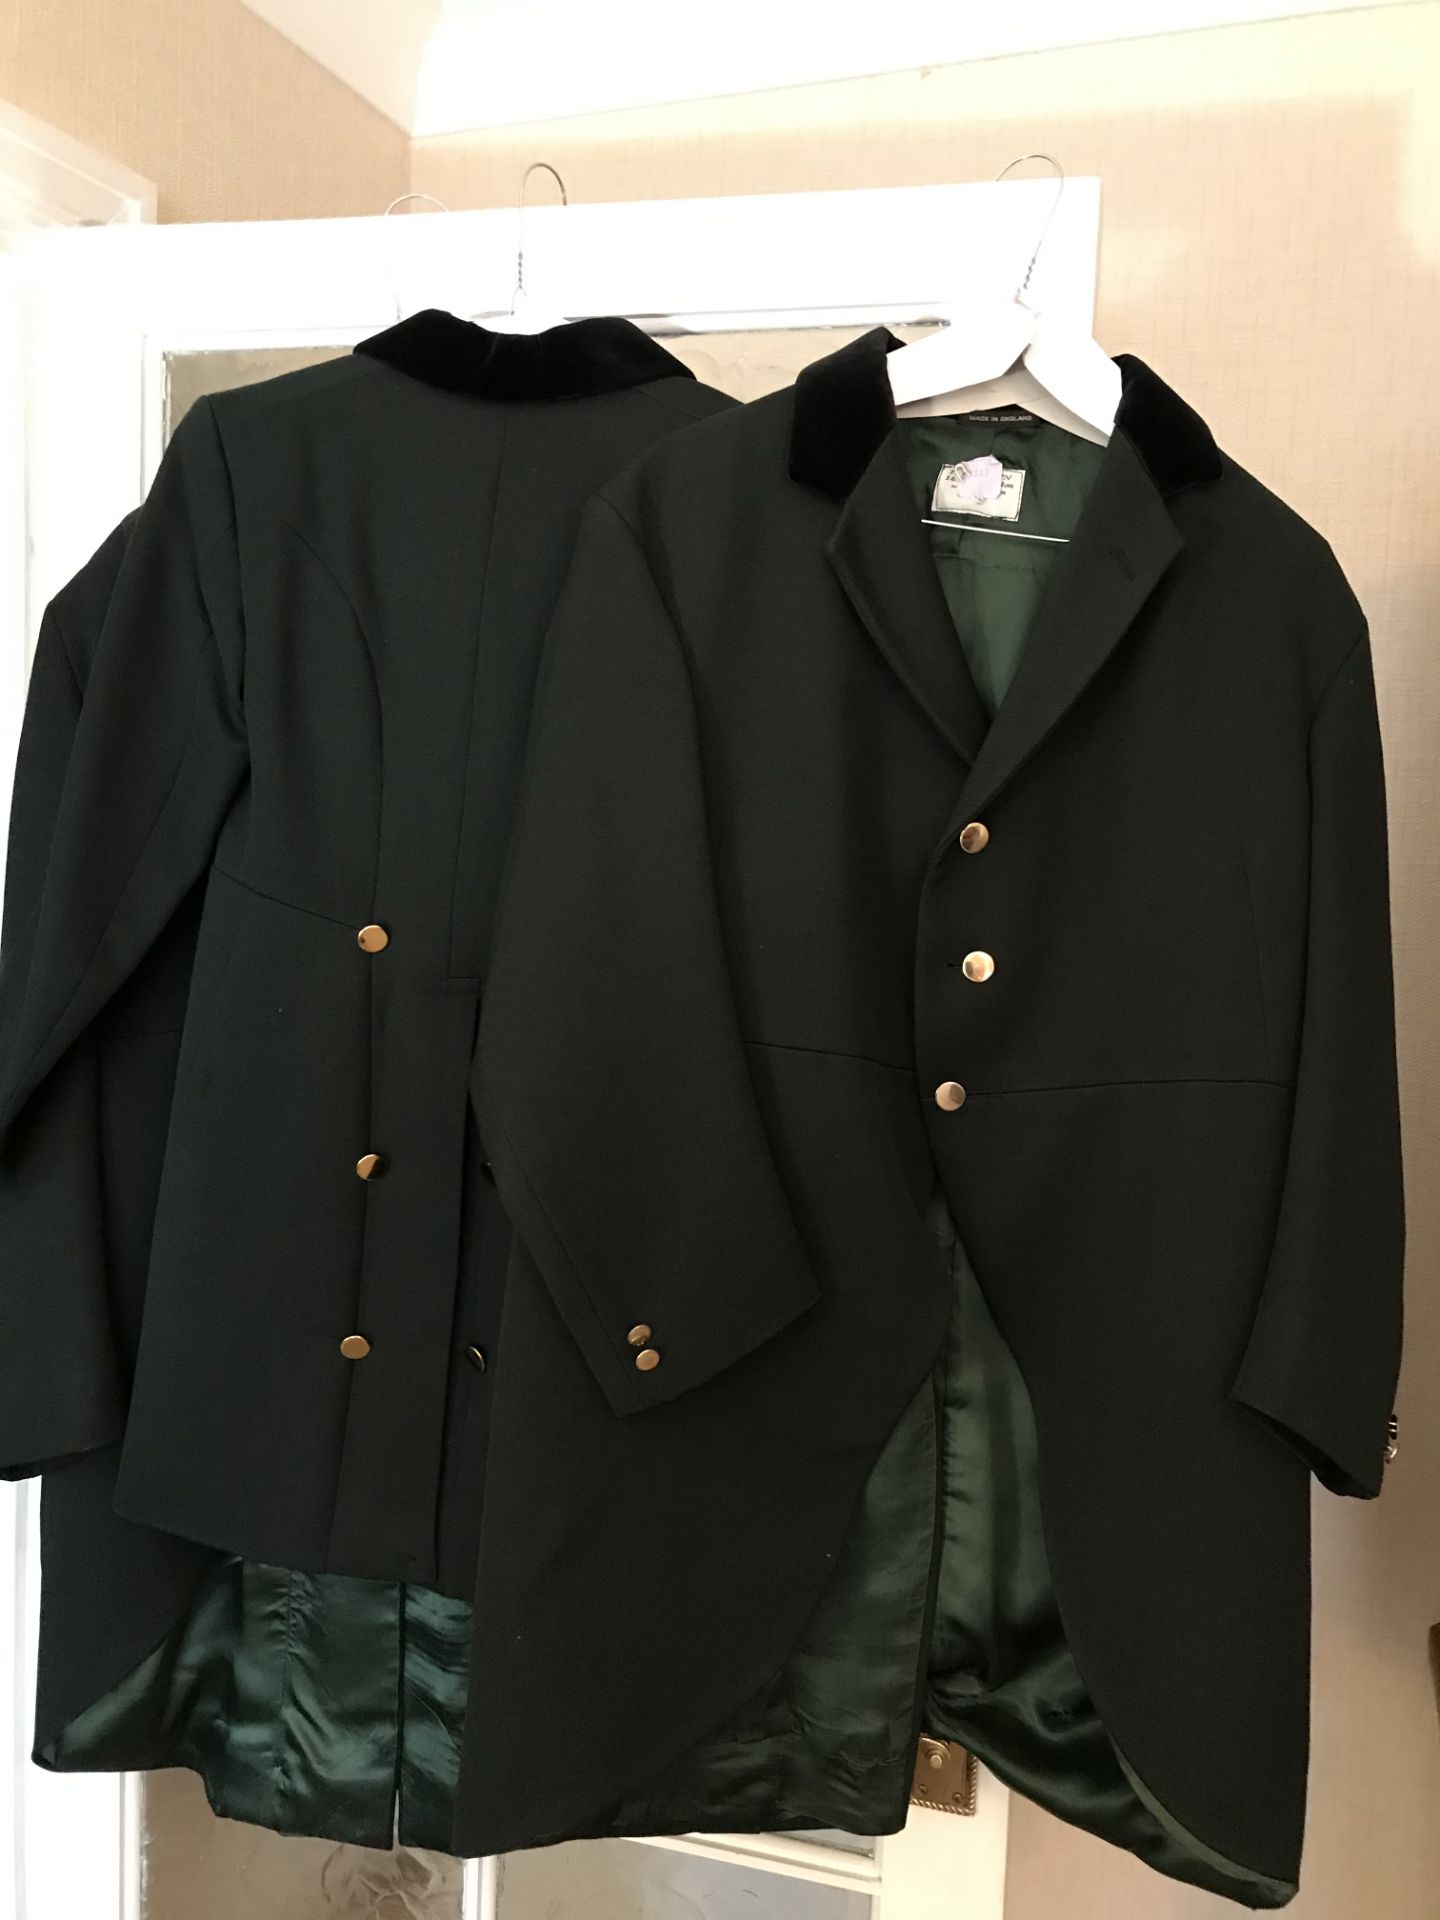 Three good quality green livery tail coats with brass buttons by Tom Brown of Eton, size 10-12, - Image 4 of 4